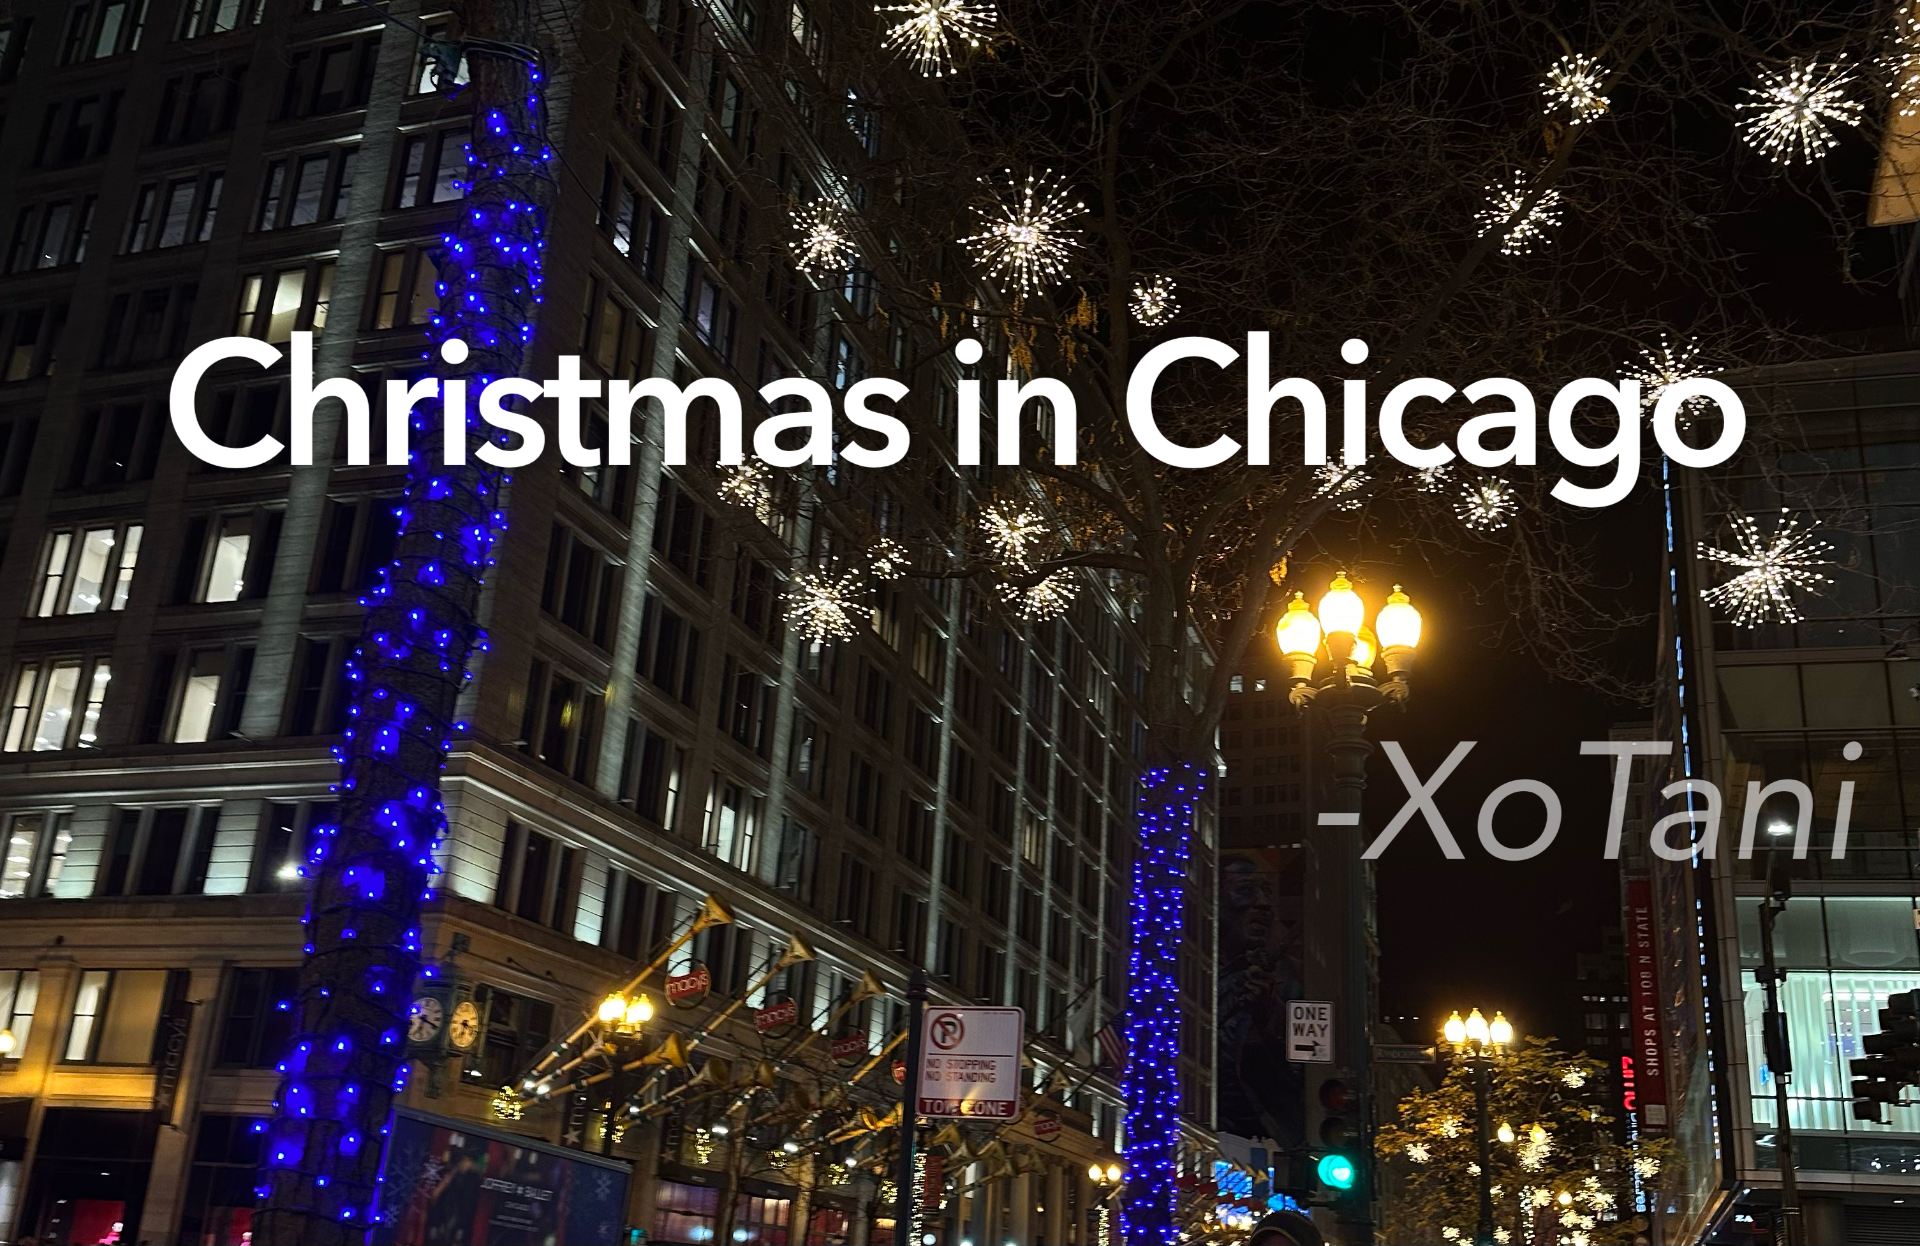 An image of Christmas lights on streets with the caption “Christmas in Chicago - XoTani” on it.